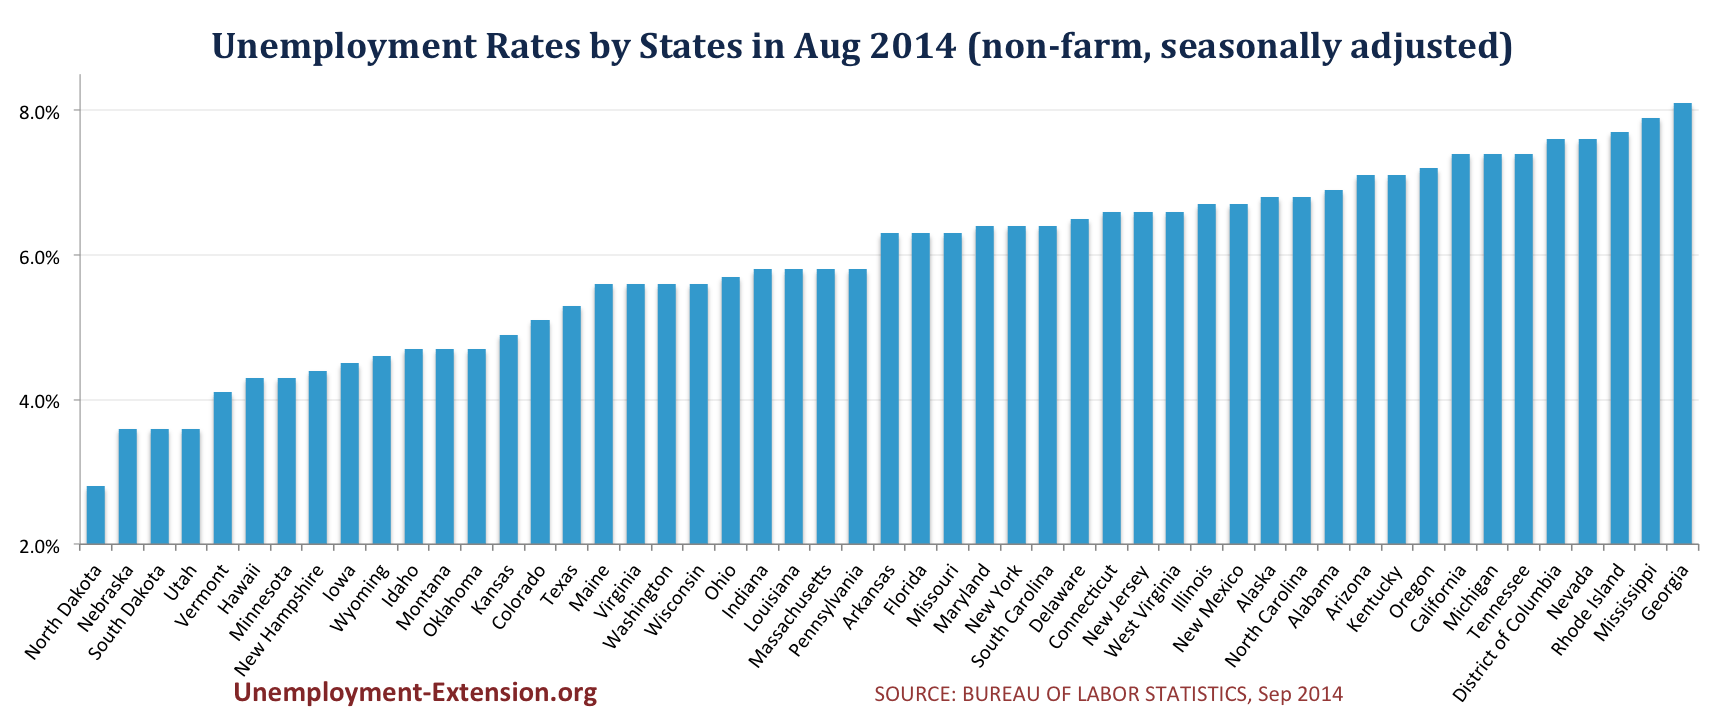 Unemployment Rates by State in August 2014